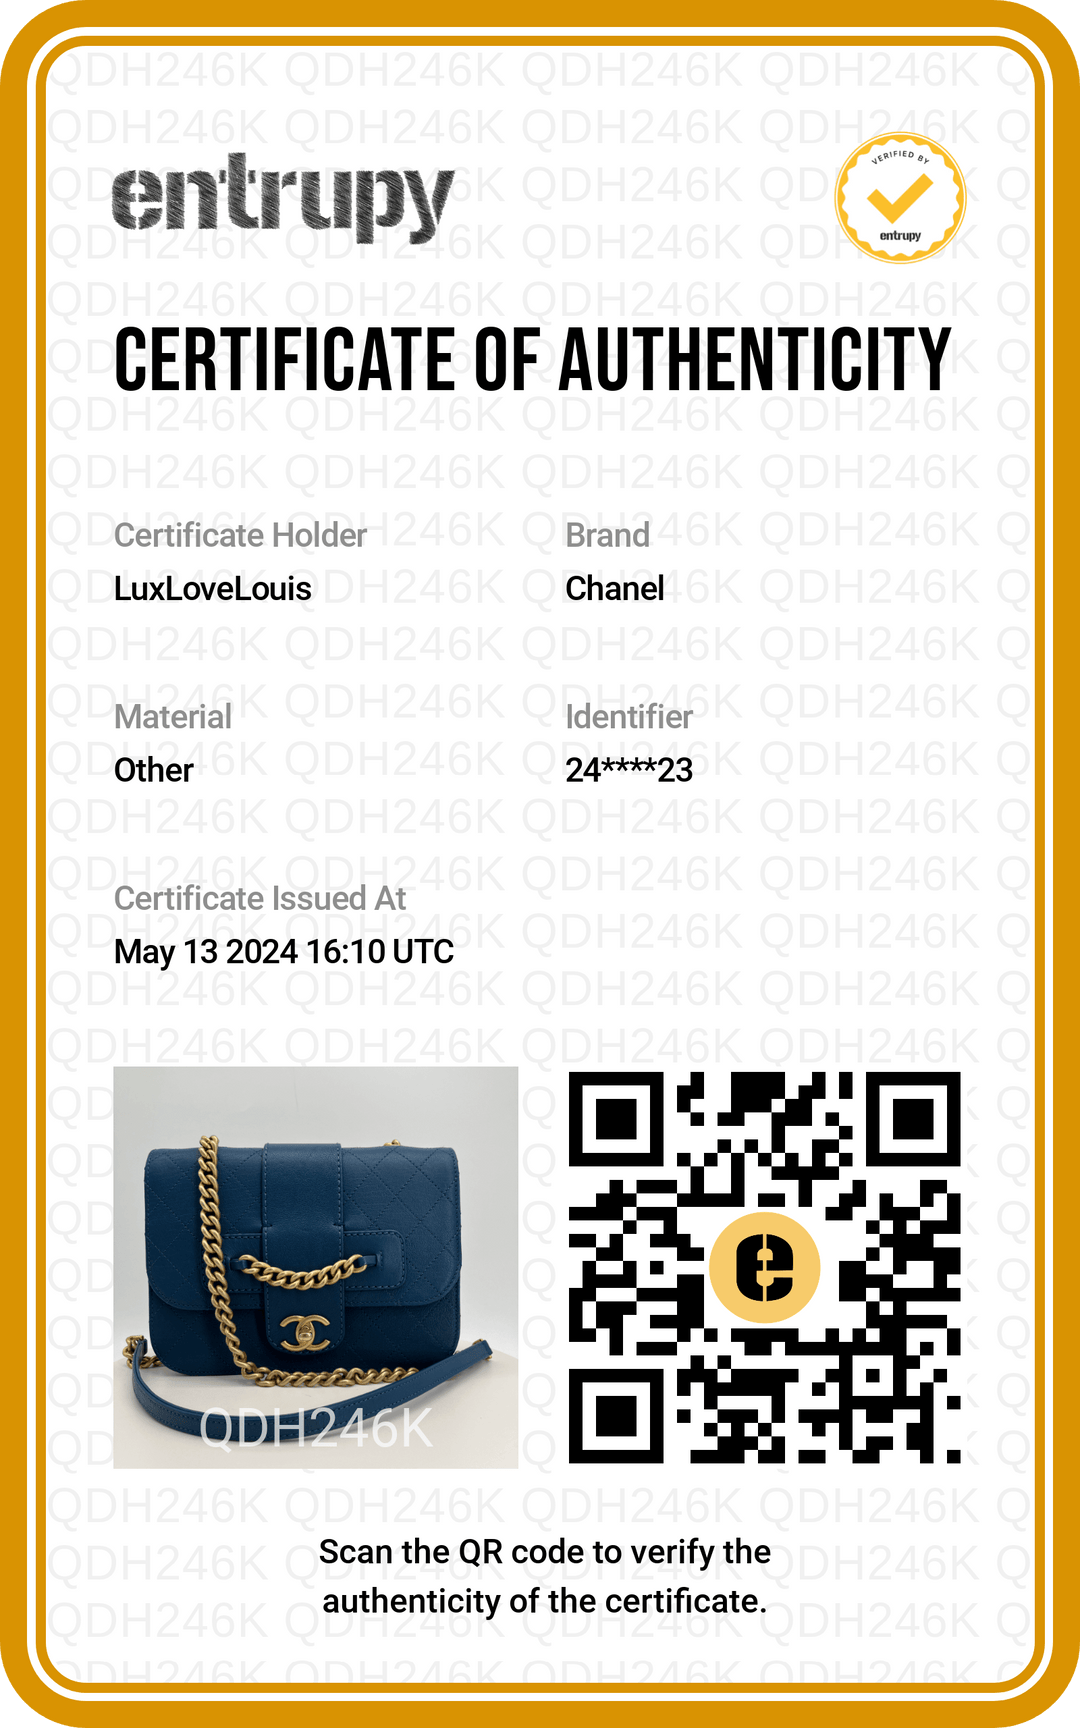 Chanel Mini Chain Front Classic Single Flap Bag in Blue Certificate of Authenticity with QR code showing product authenticity details